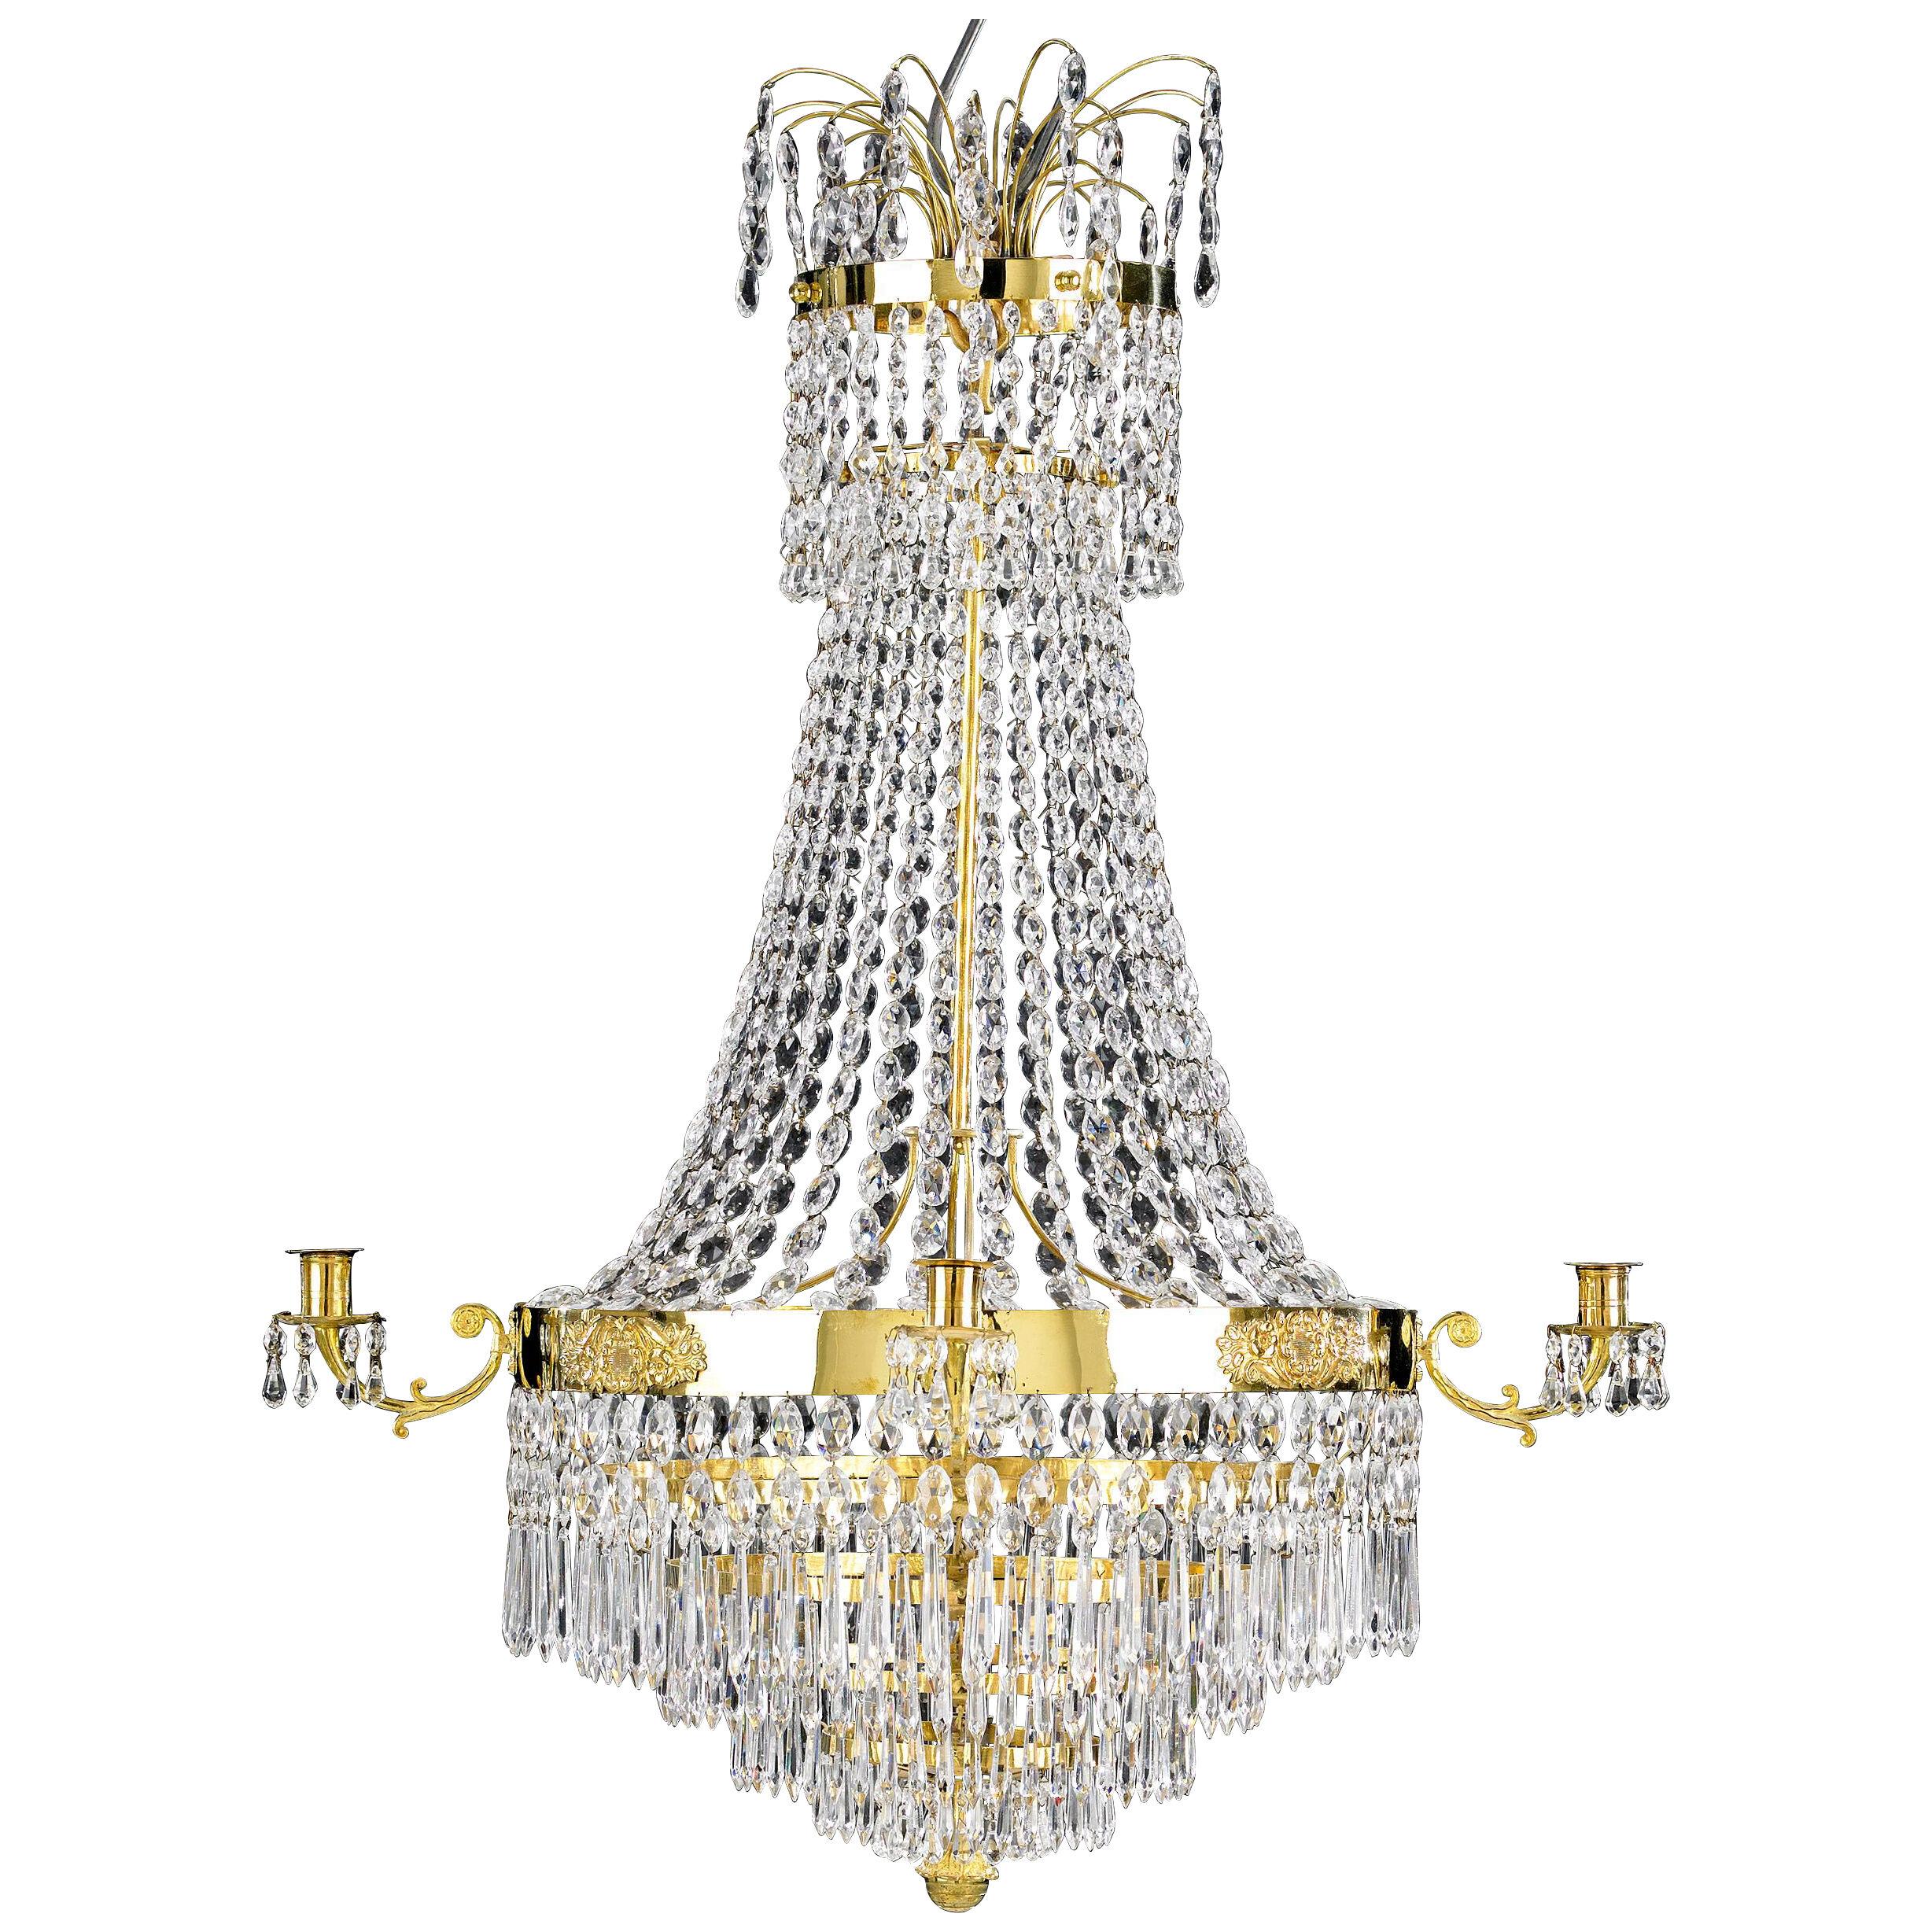 Early 19th Century Swedish Empire Gilt-Bronze and Cut-Glass Chandelier